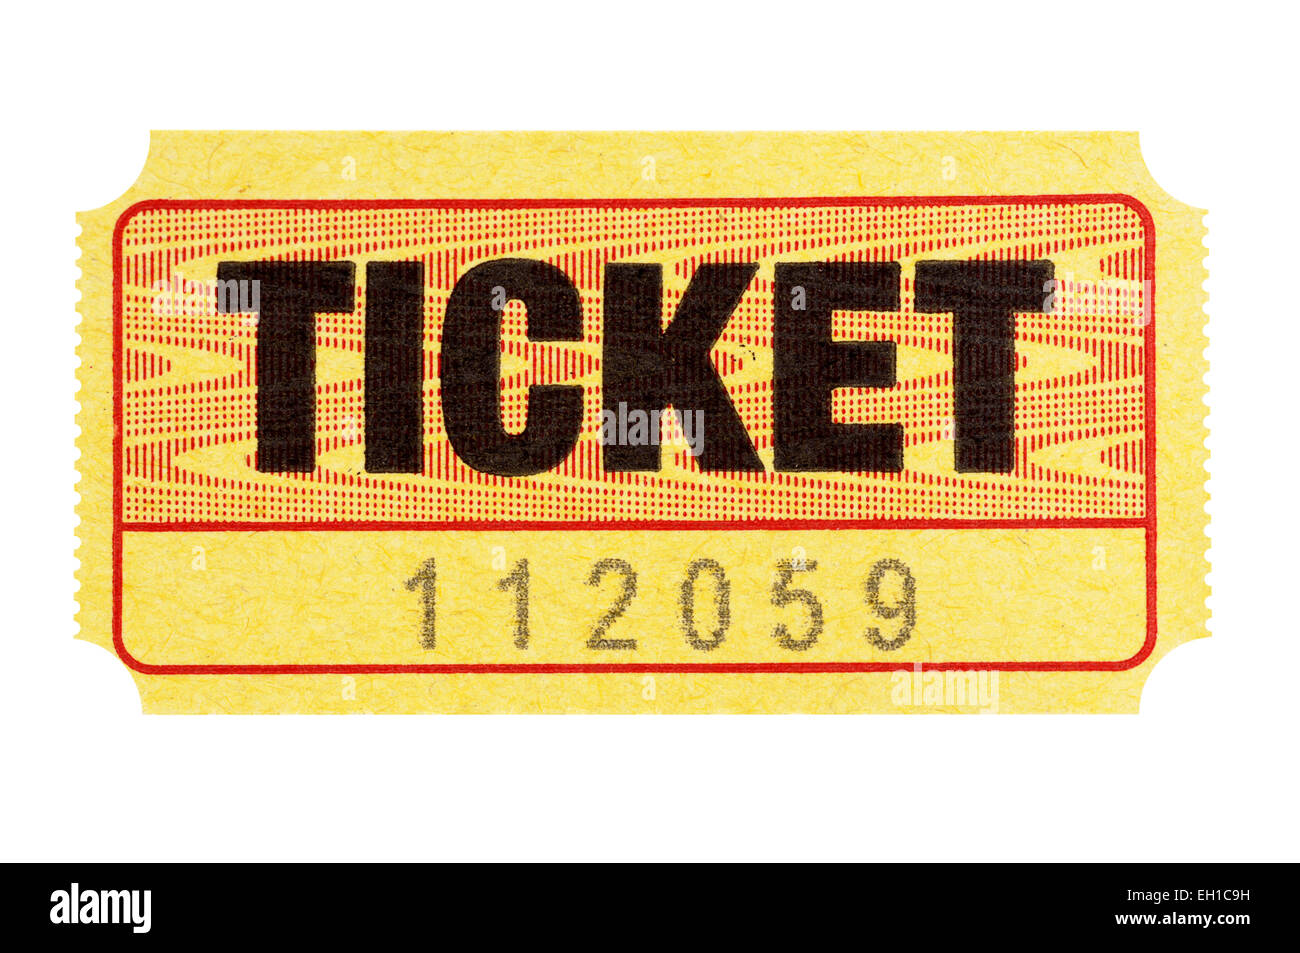 Yellow admission ticket isolated on a white background. Stock Photo